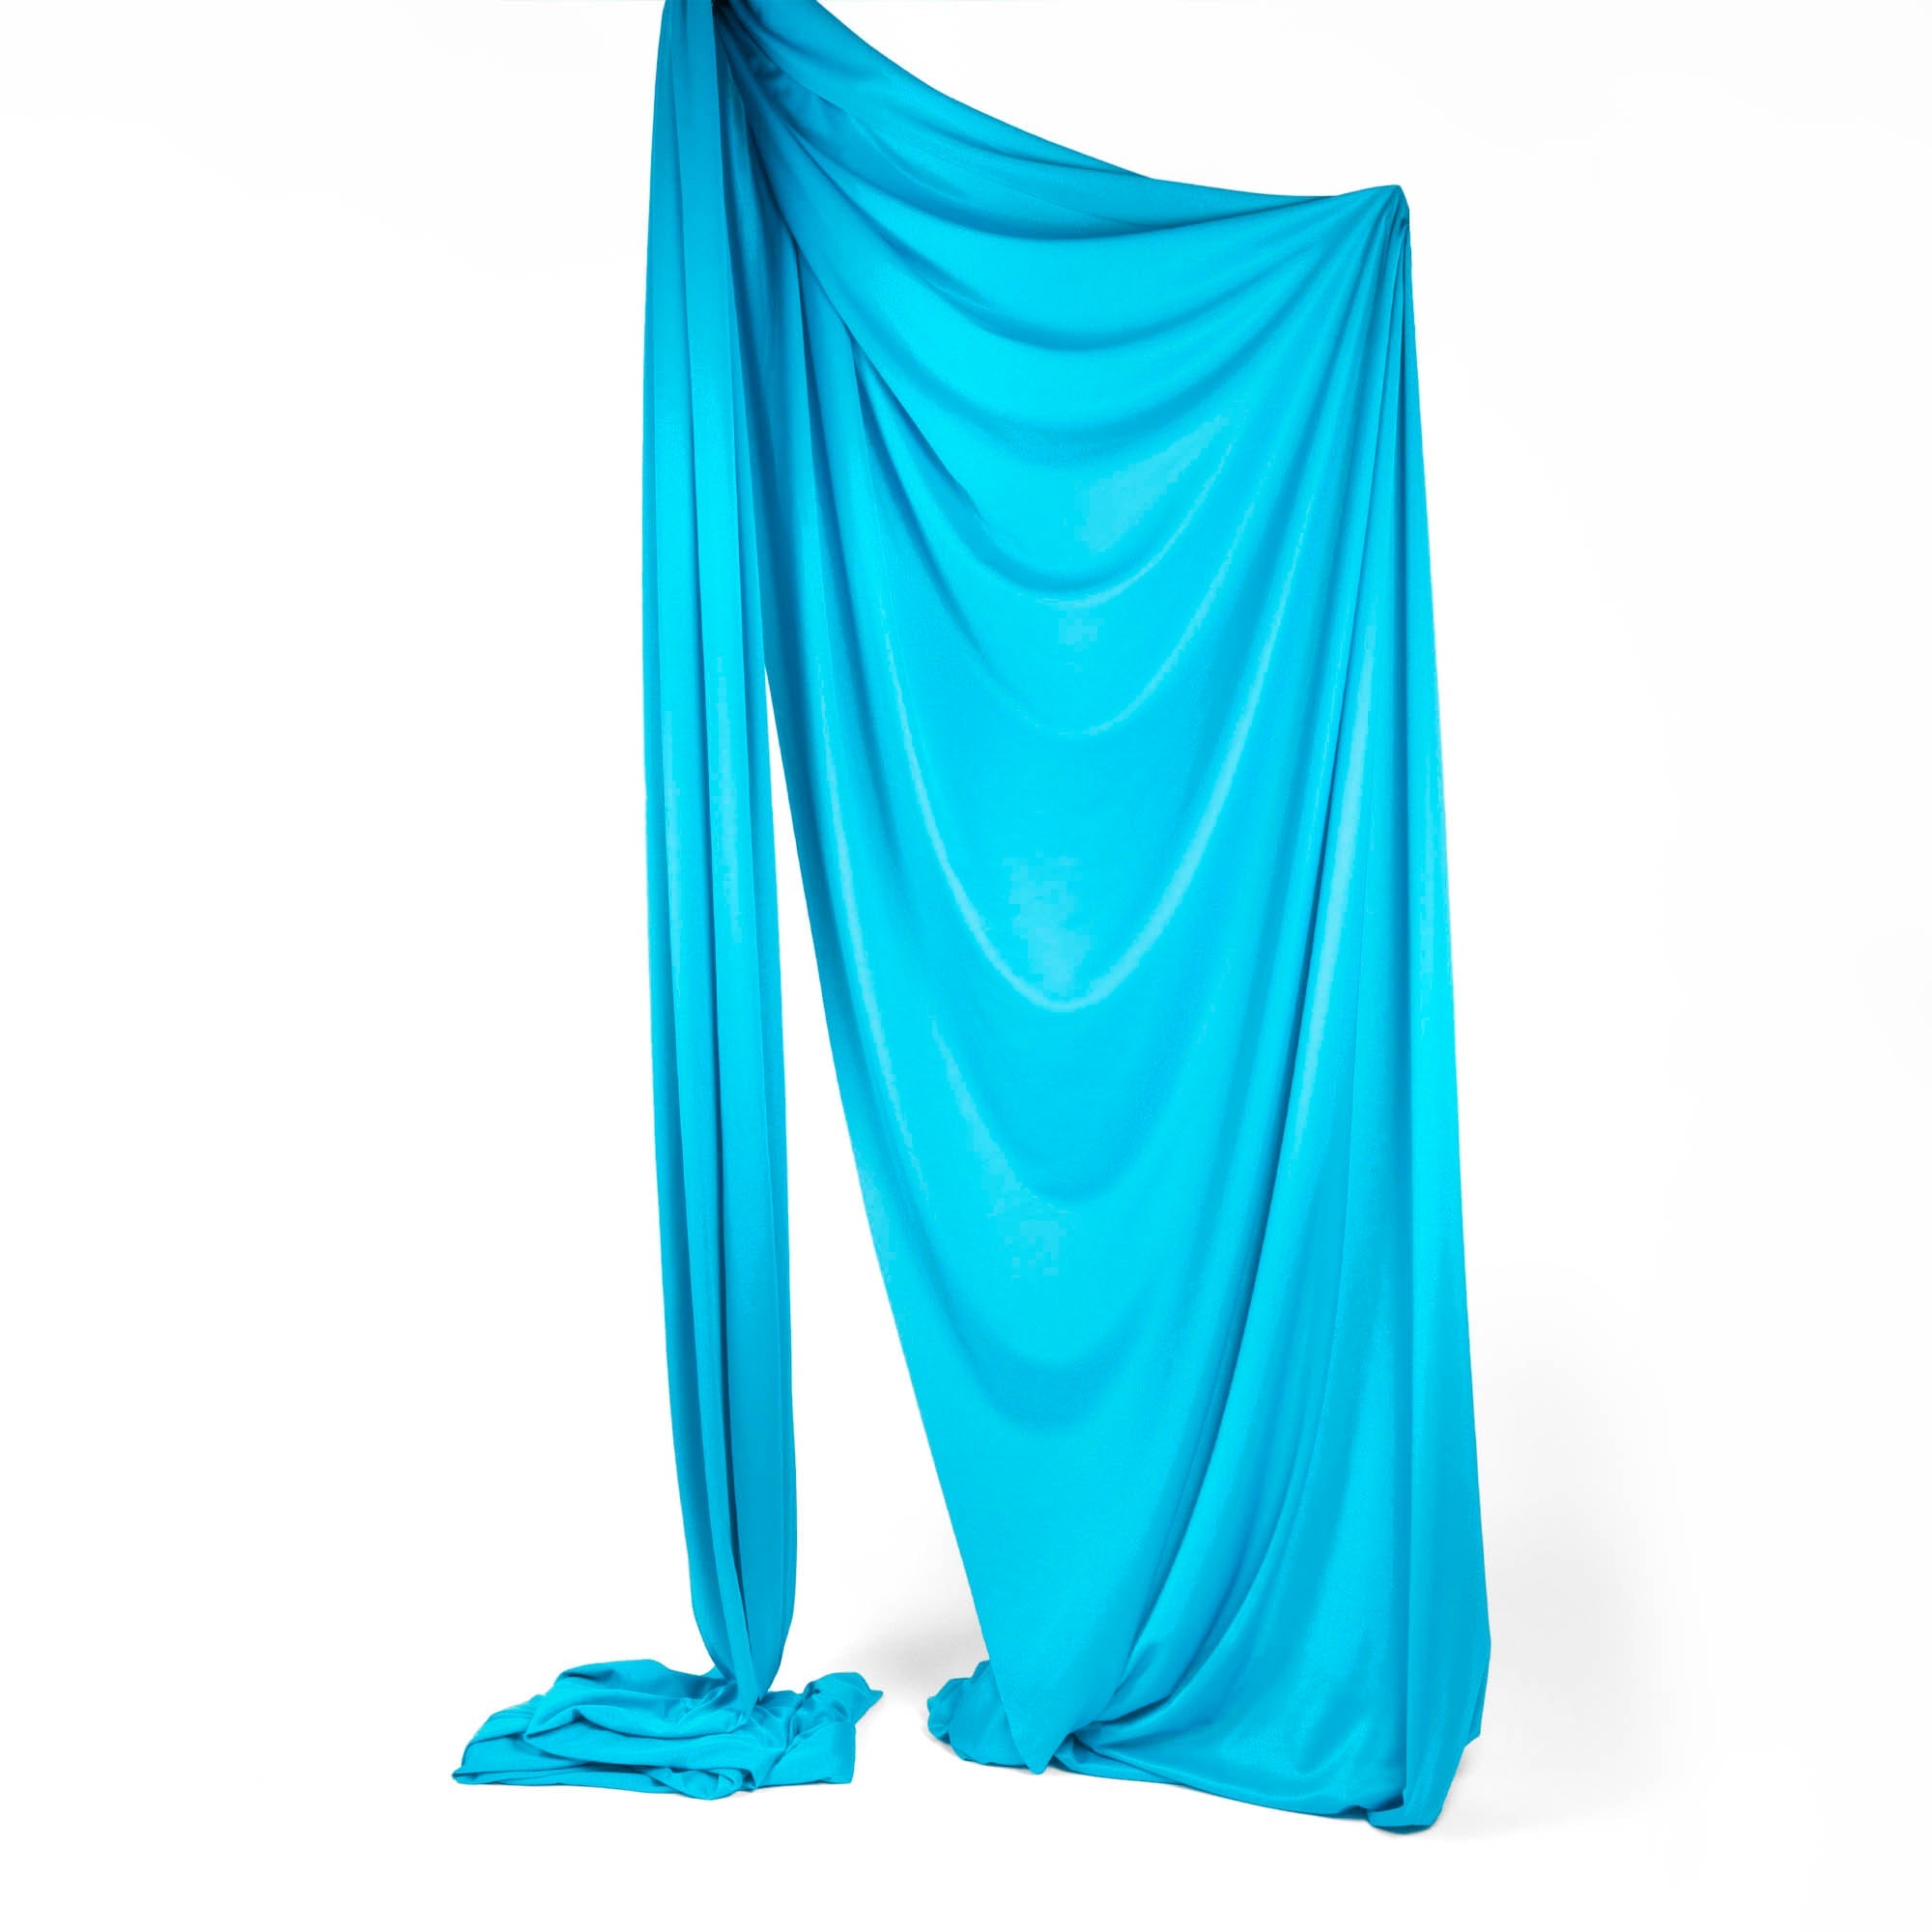 Firetoys youth aerial silk in turquoise rigged